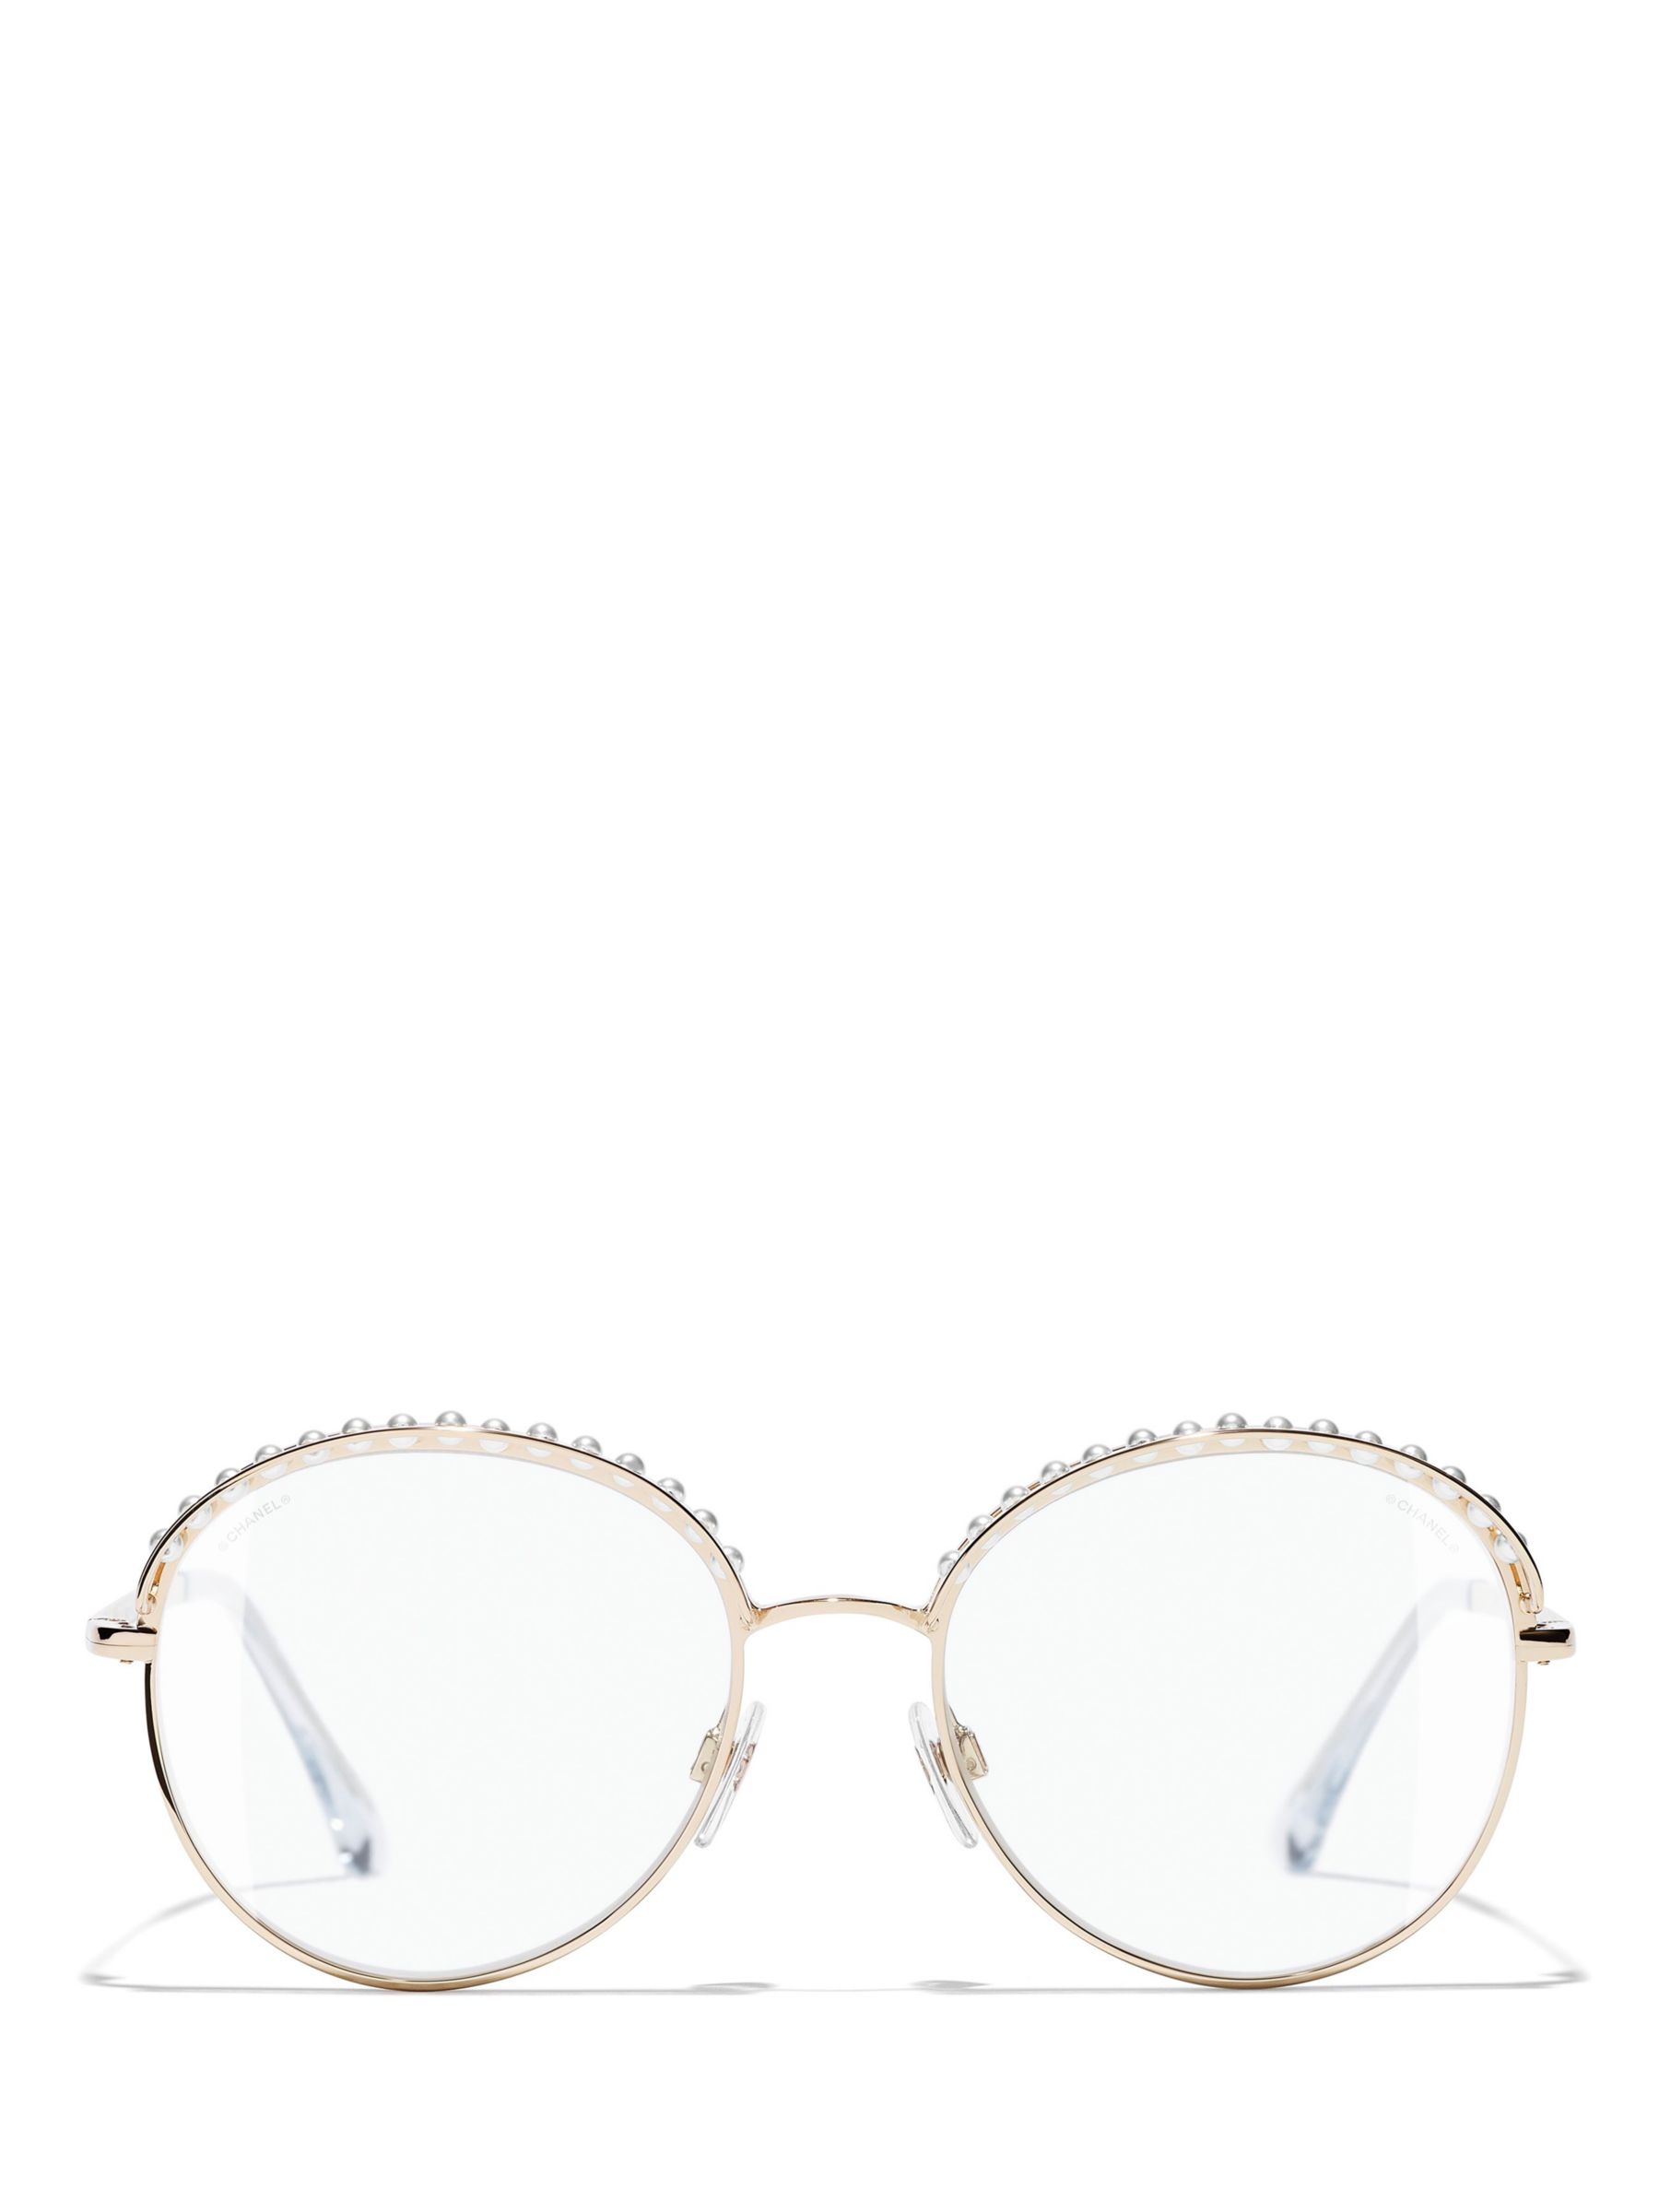 CHANEL Round Sunglasses CH4247H Gold/Clear at John Lewis & Partners